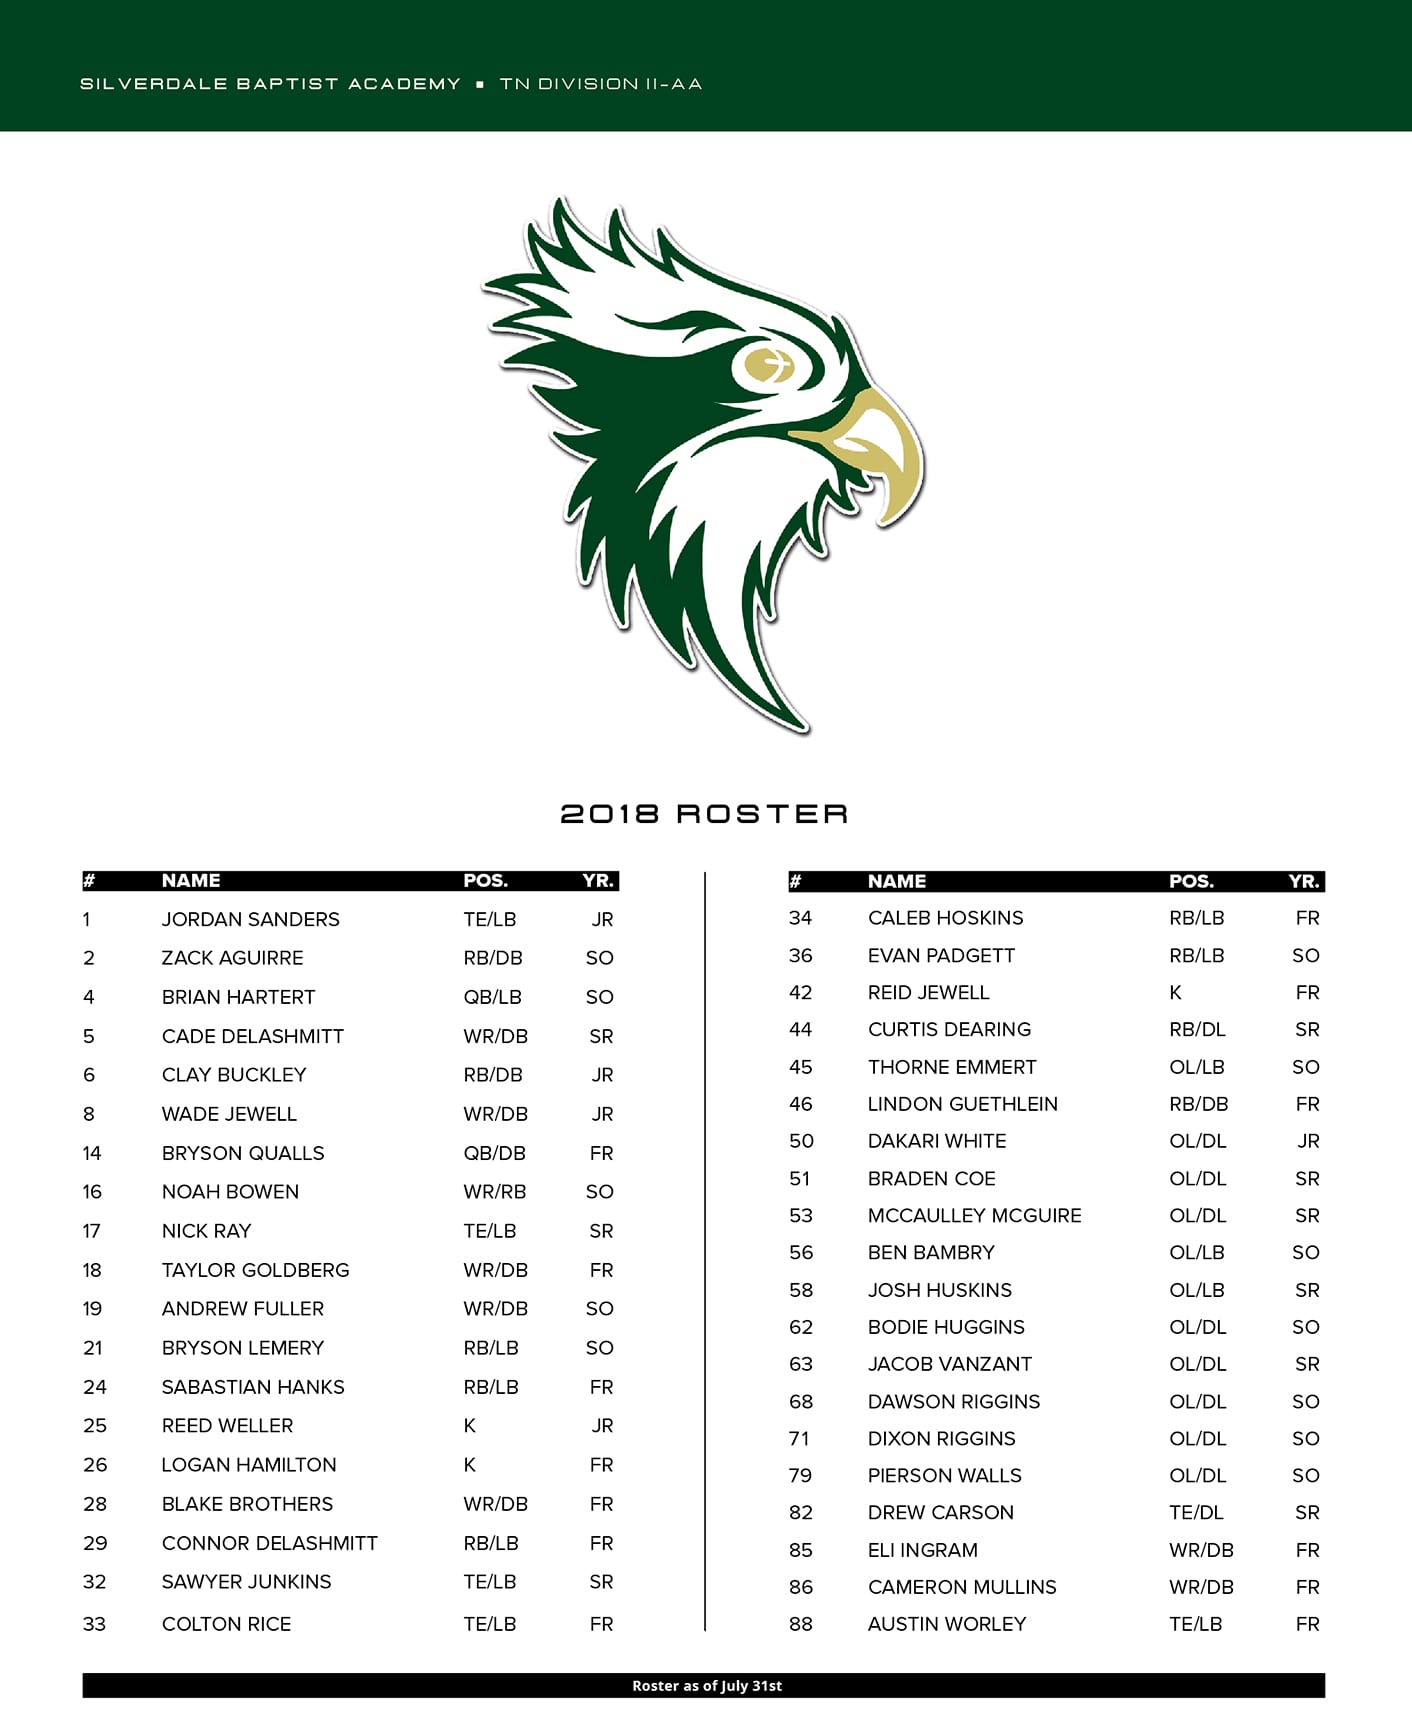 Silverdale Baptist Academy High School Football 2018 Roster in Chattanooga